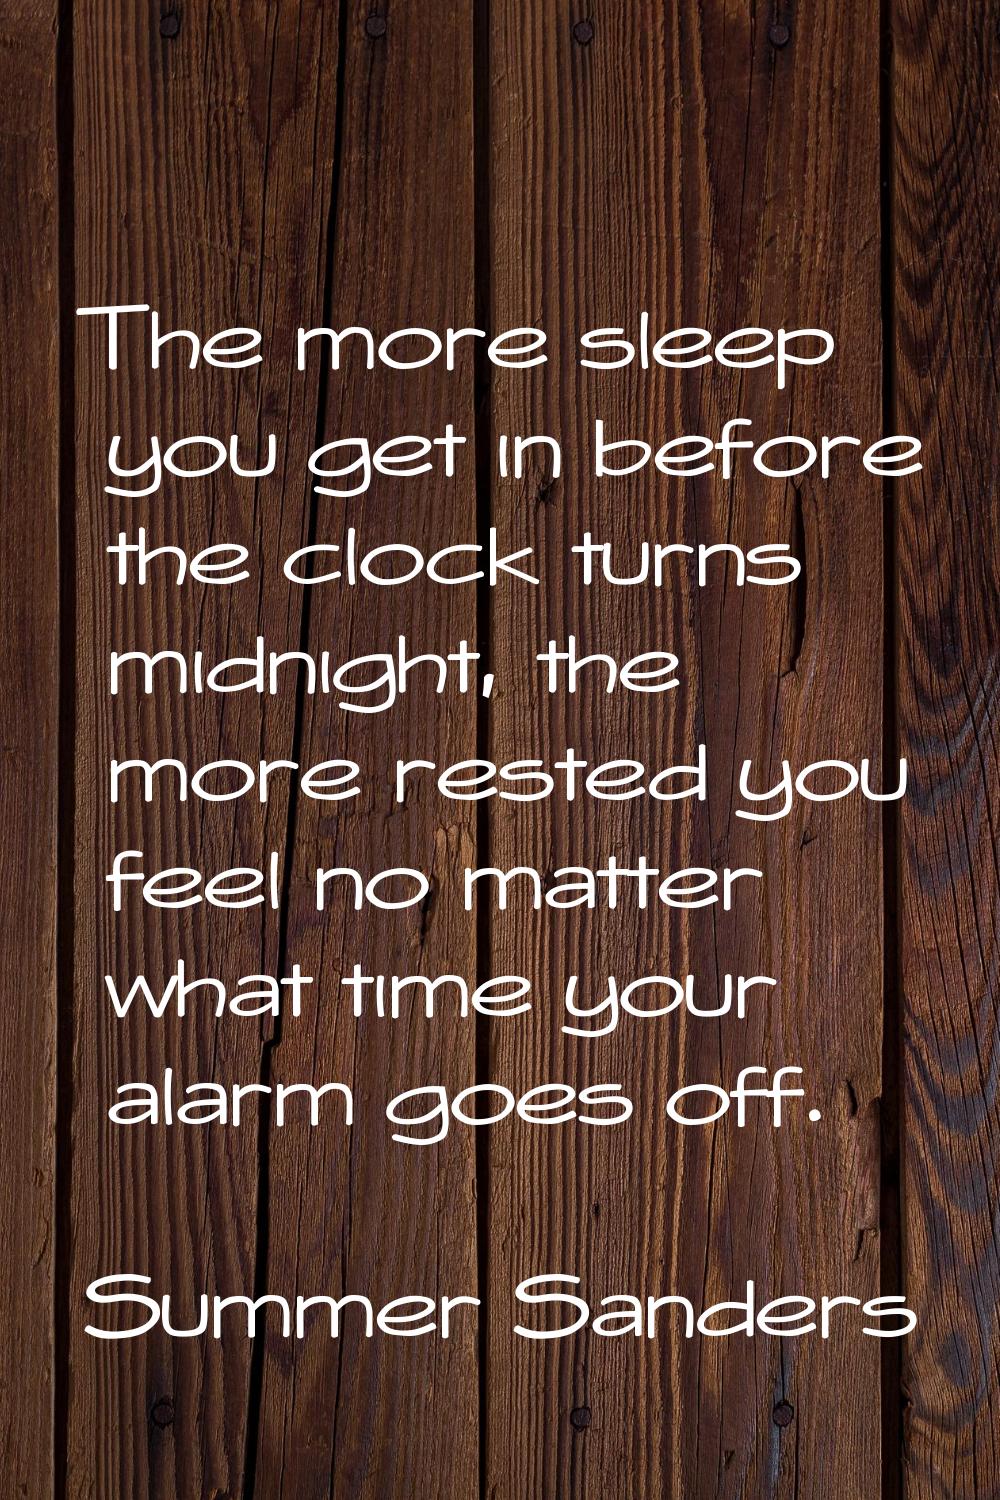 The more sleep you get in before the clock turns midnight, the more rested you feel no matter what 